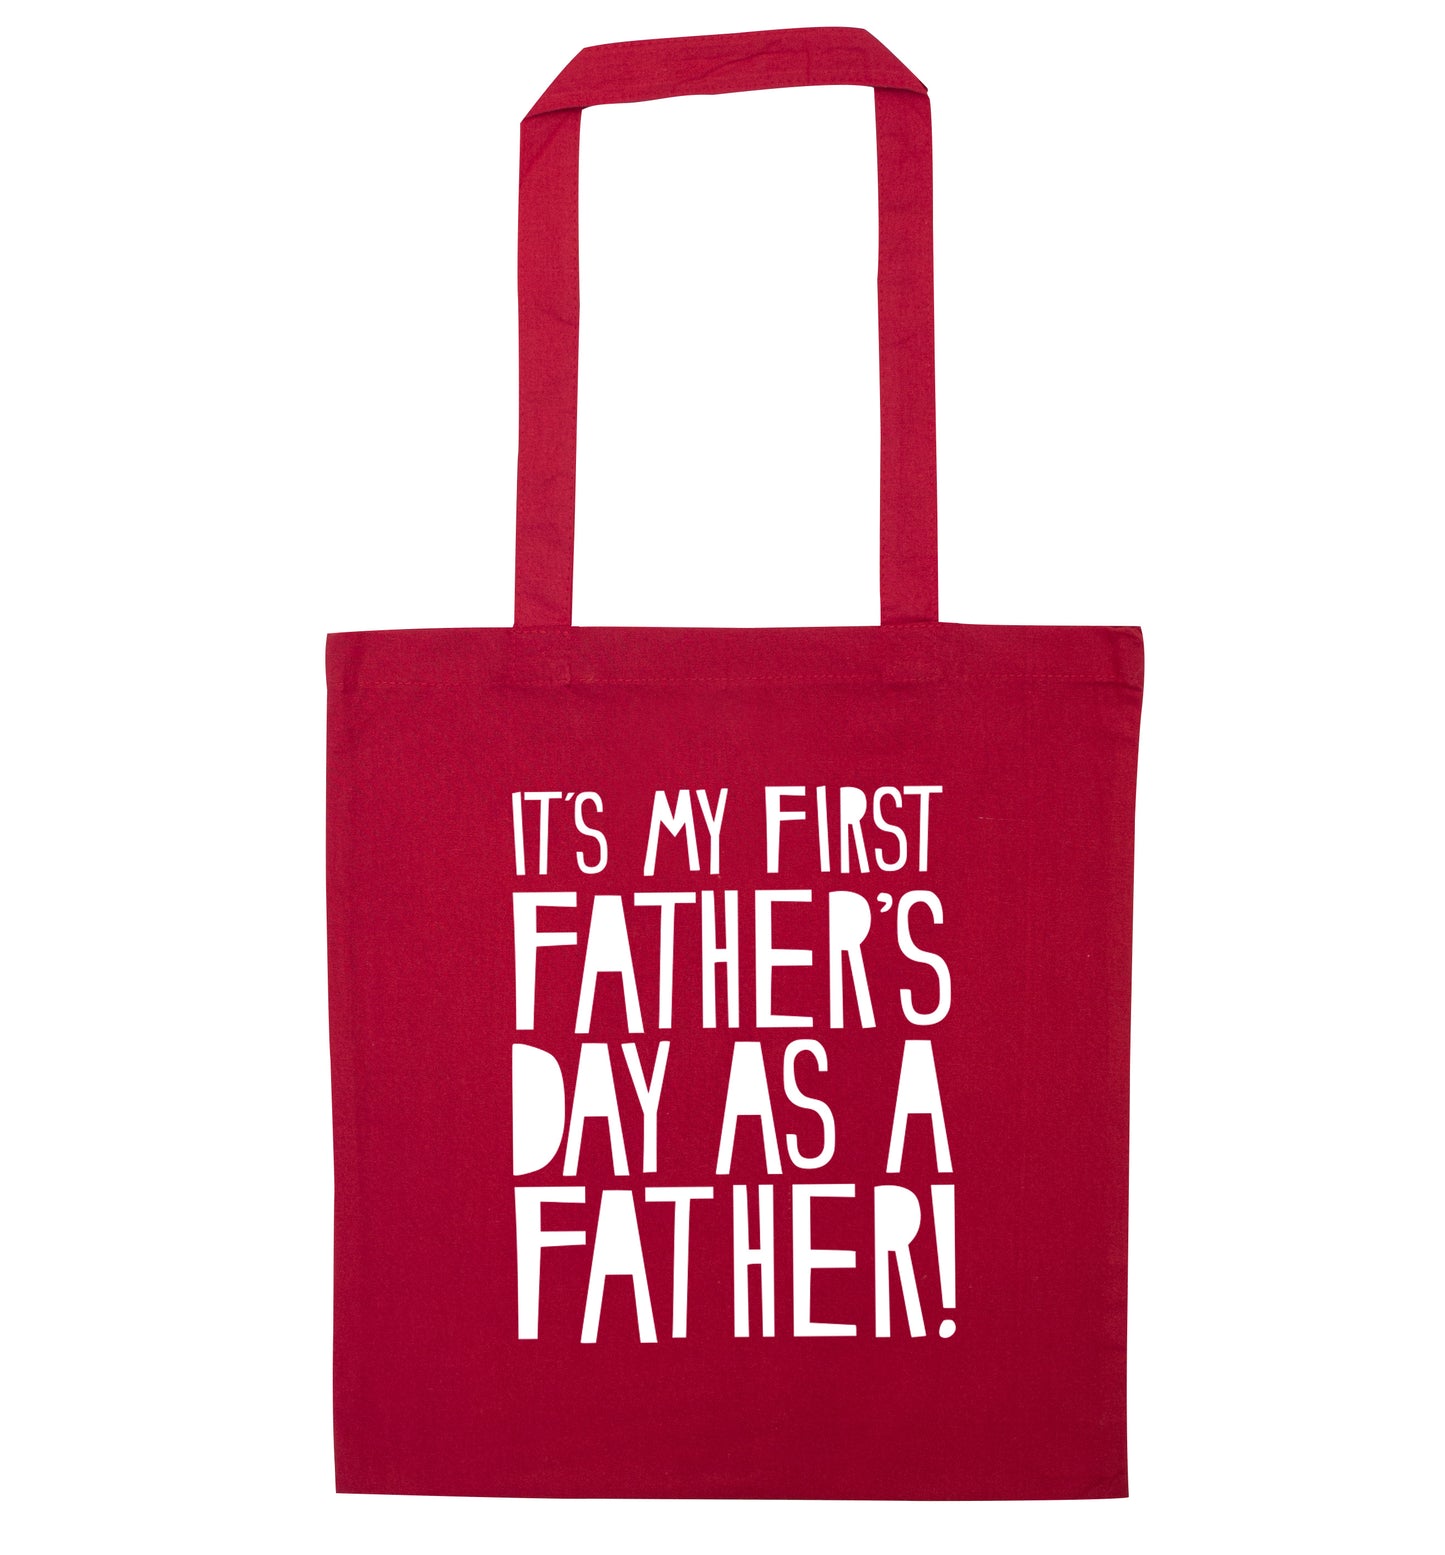 It's my first Father's Day as a father! red tote bag